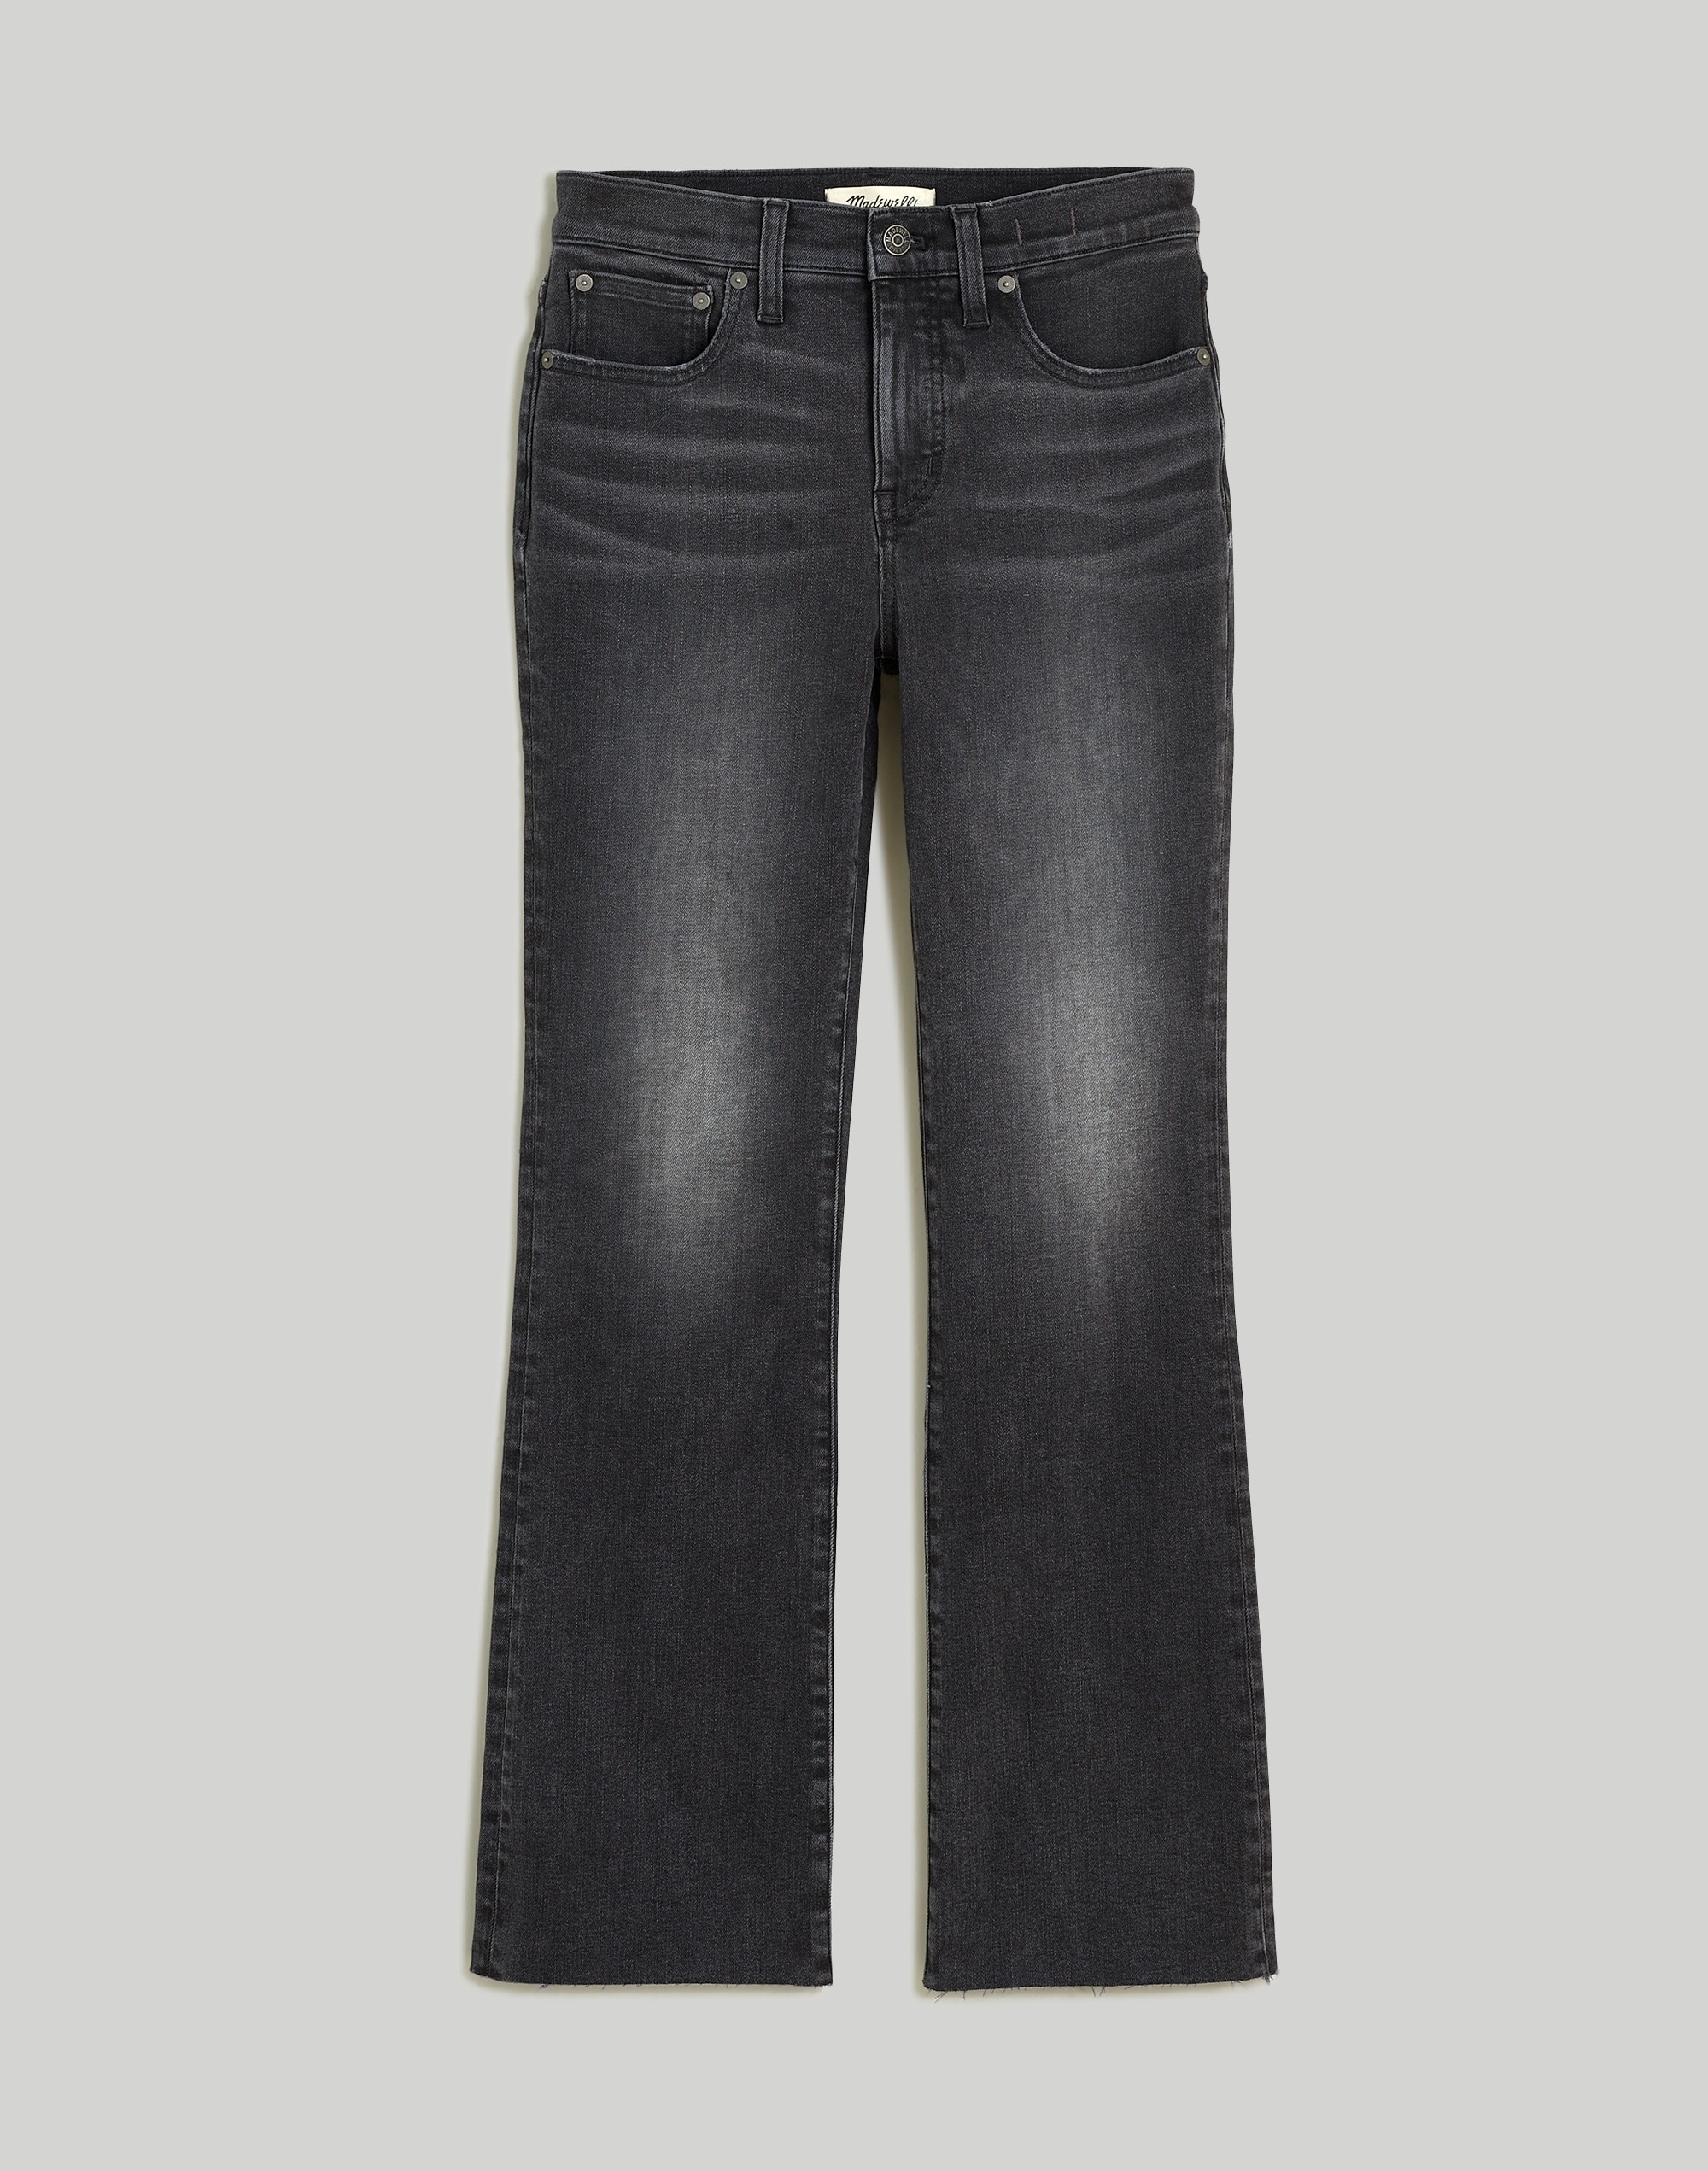 Petite Kick Out Crop Jeans Washed Black: Raw Hem Edition